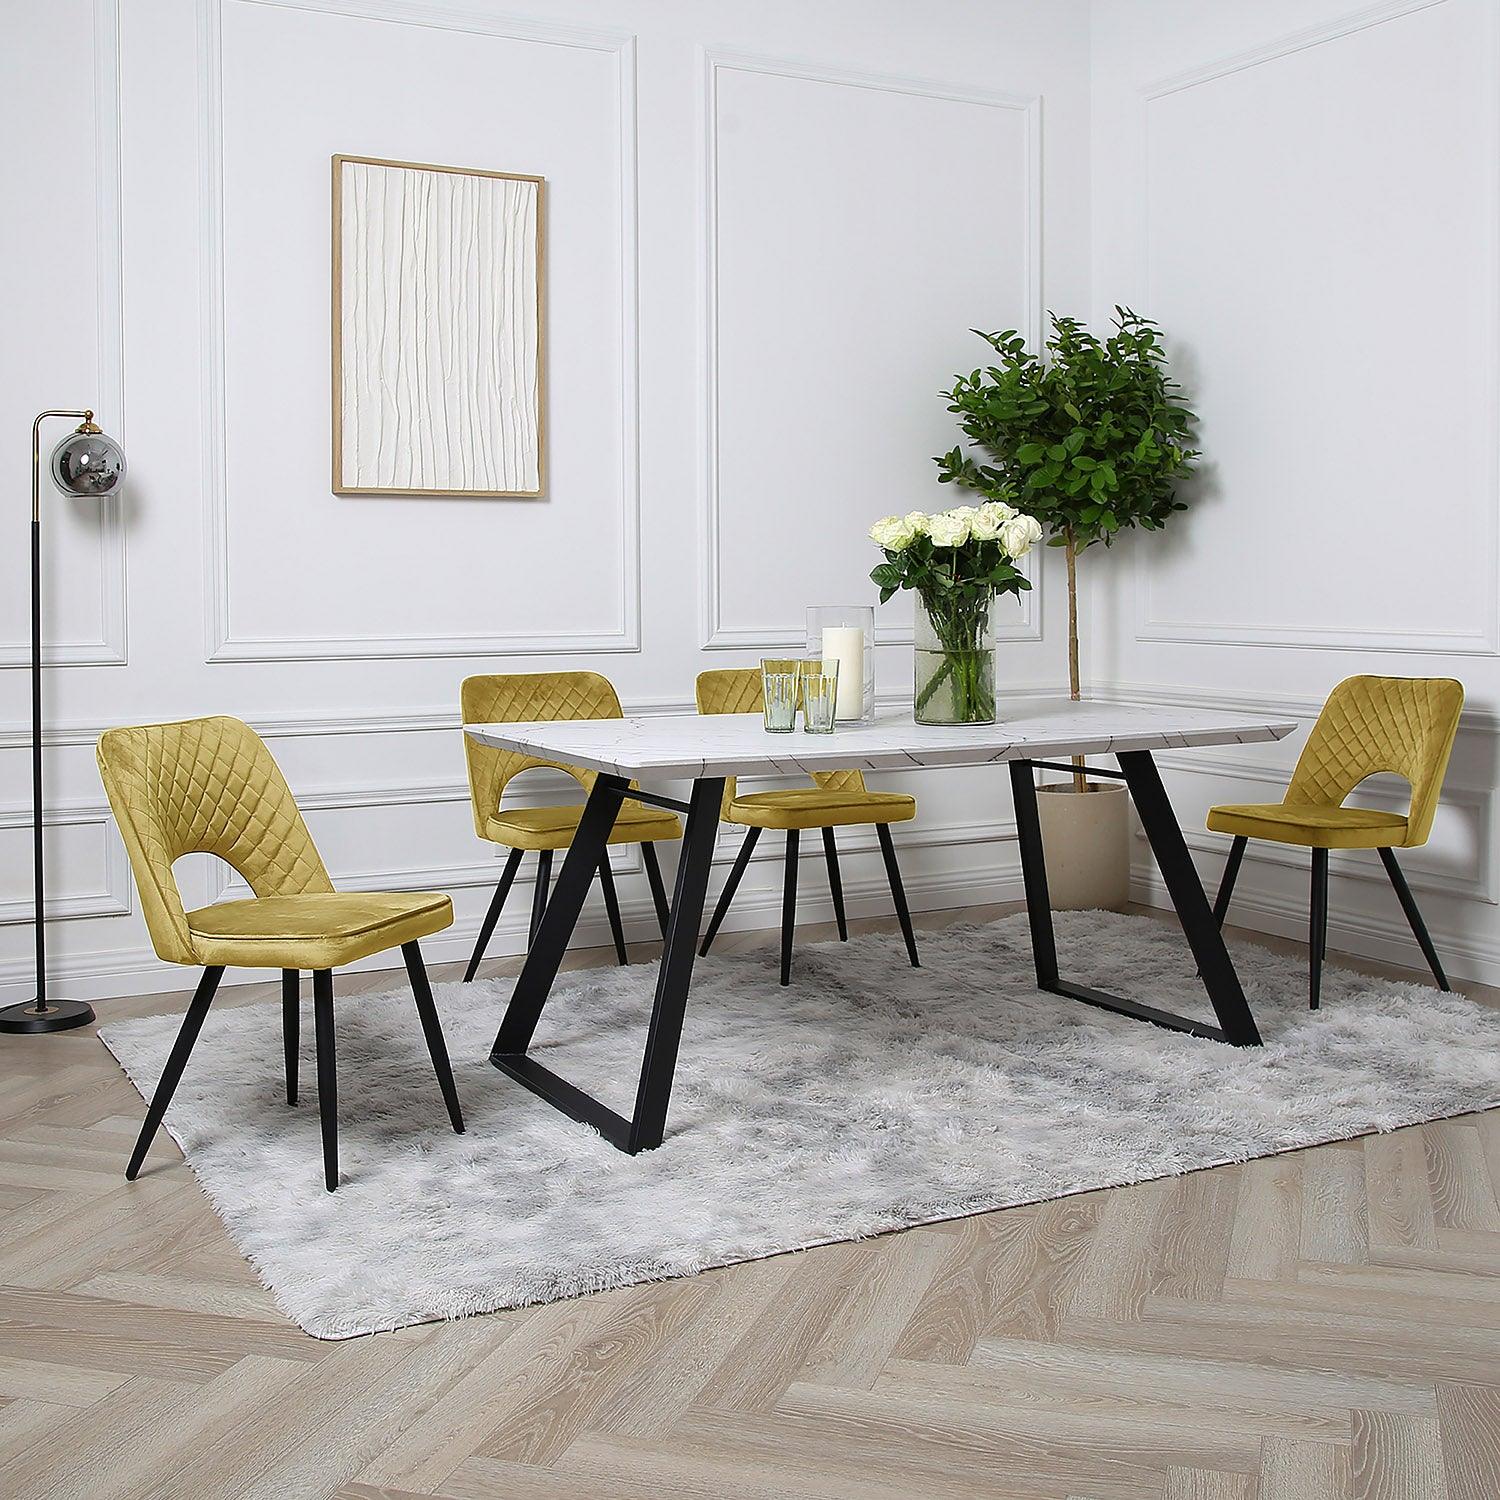 Atlas marble dining table set - 4 seater - yellow dining chairs - Laura James